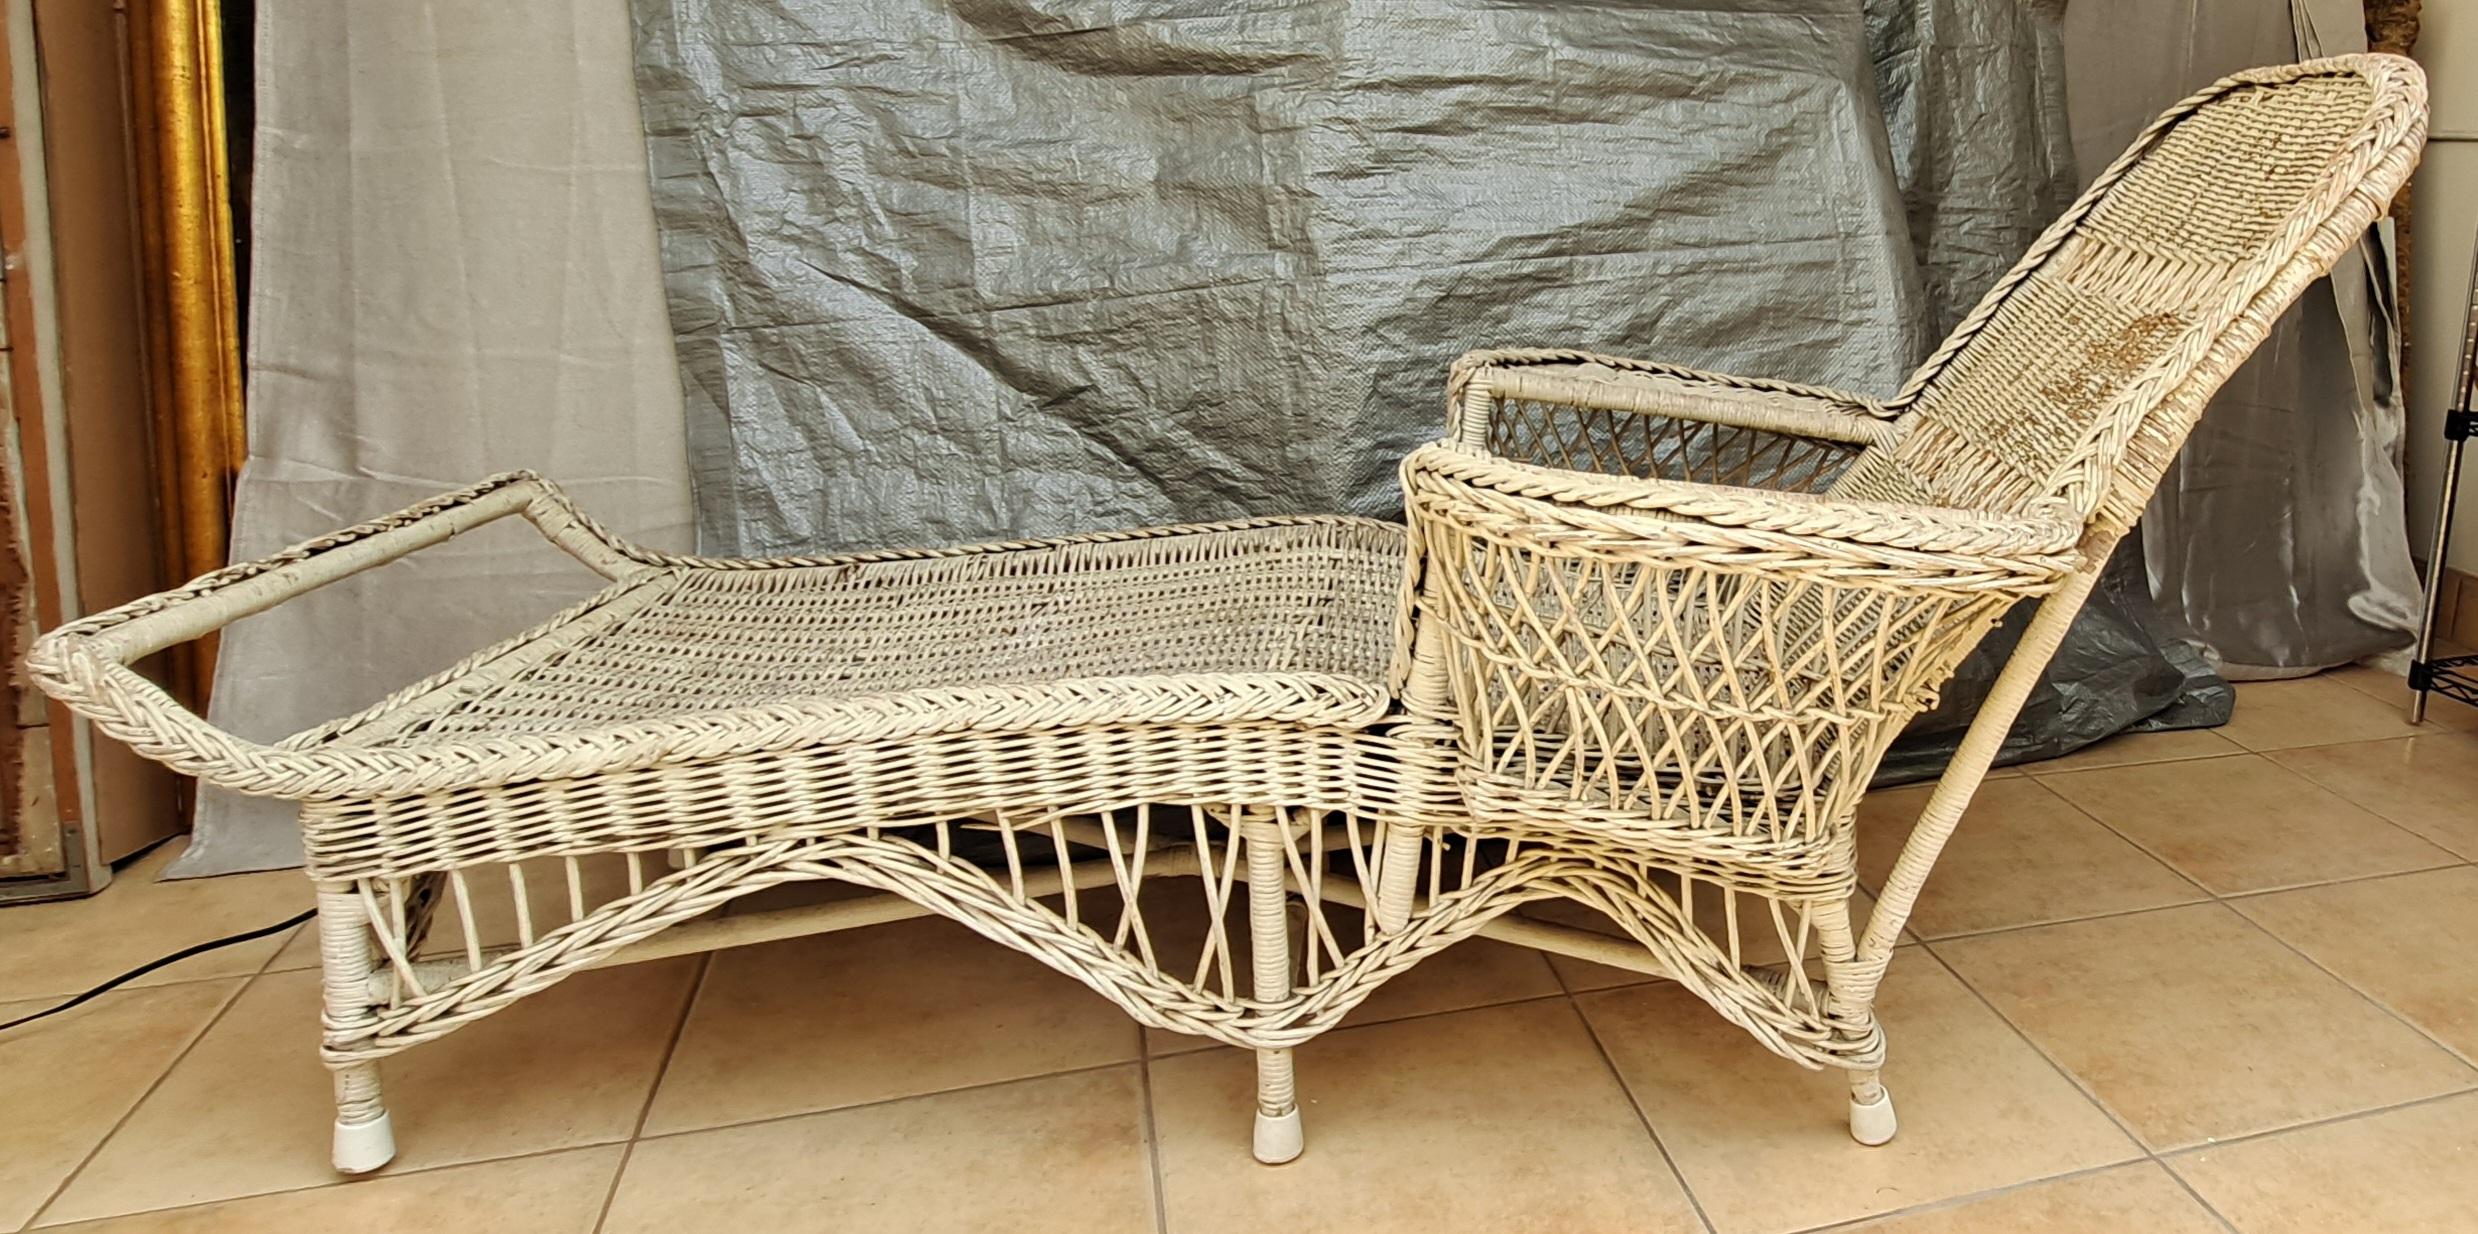 1920's White Wicker Chaise Lounge For Sale 5